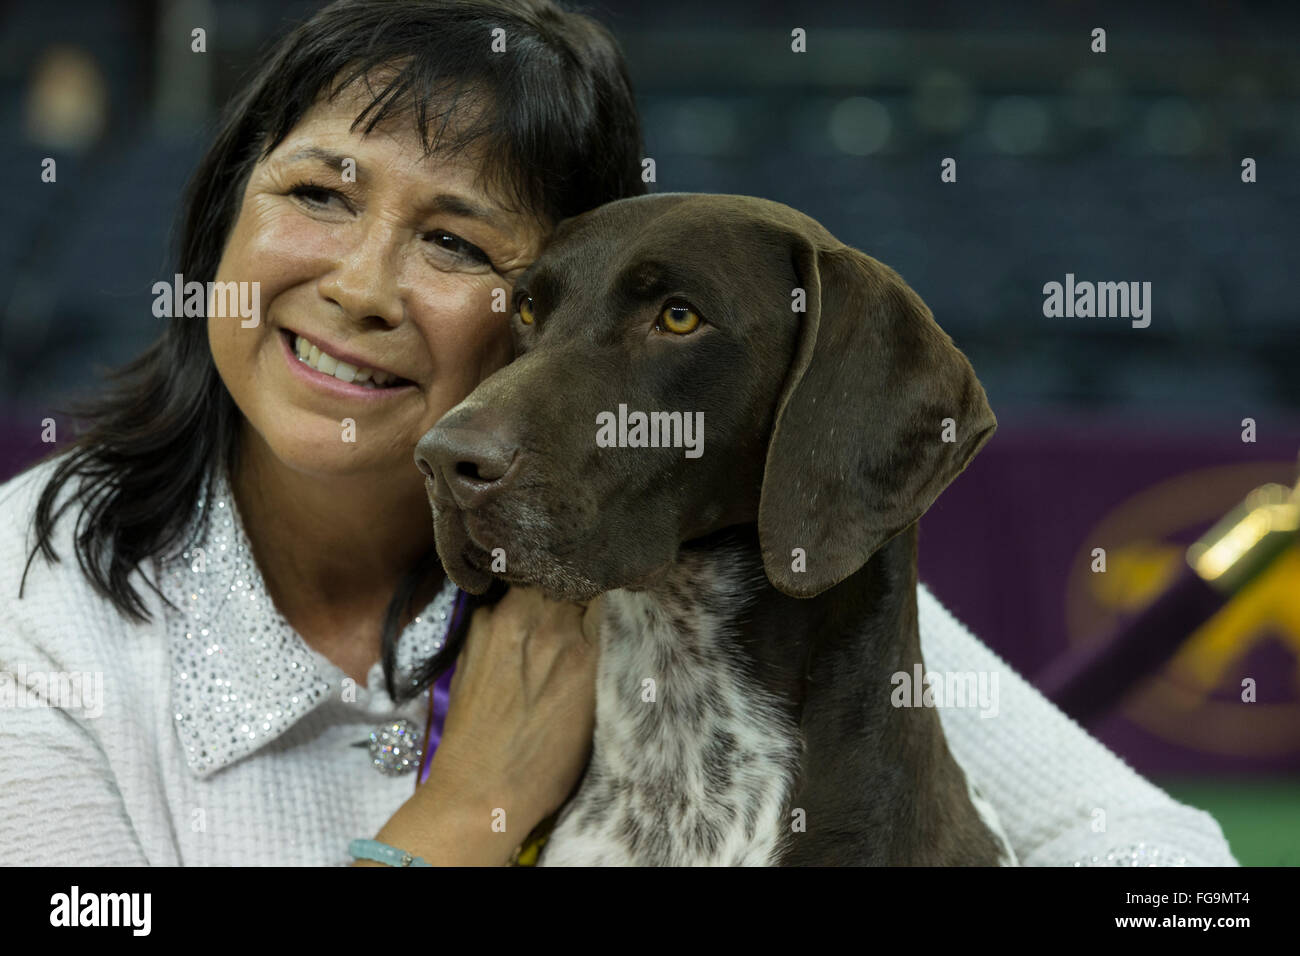 New York, NY - February 16, 2016: Best of Show German shorthaired pointer poses with handler Valerie Nunes-Atkinson at 140 Westminster Kennel Club dog show at Madison Square Garden Stock Photo